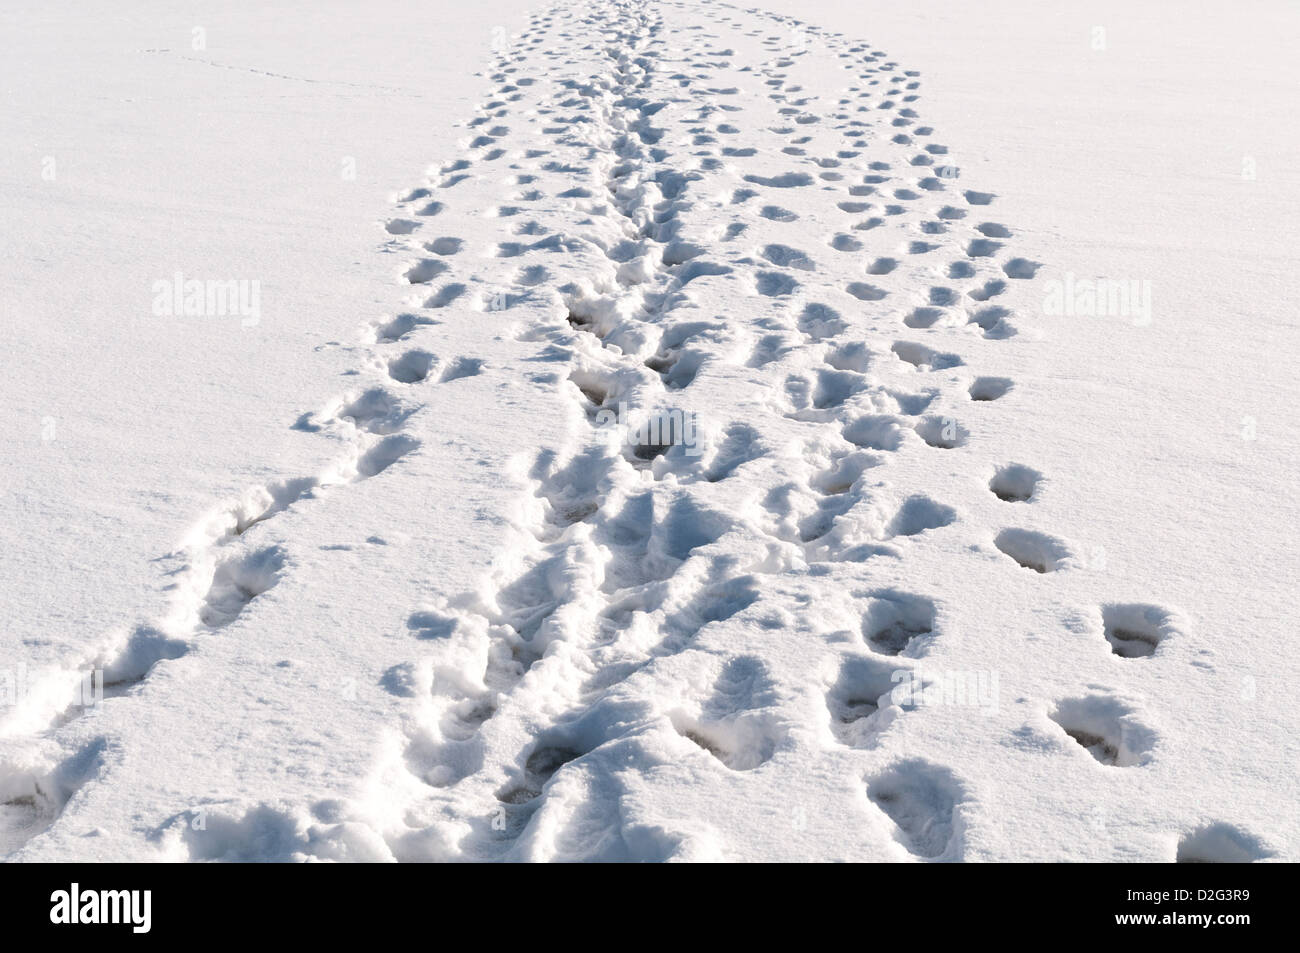 Lots of footprints in snow Stock Photo